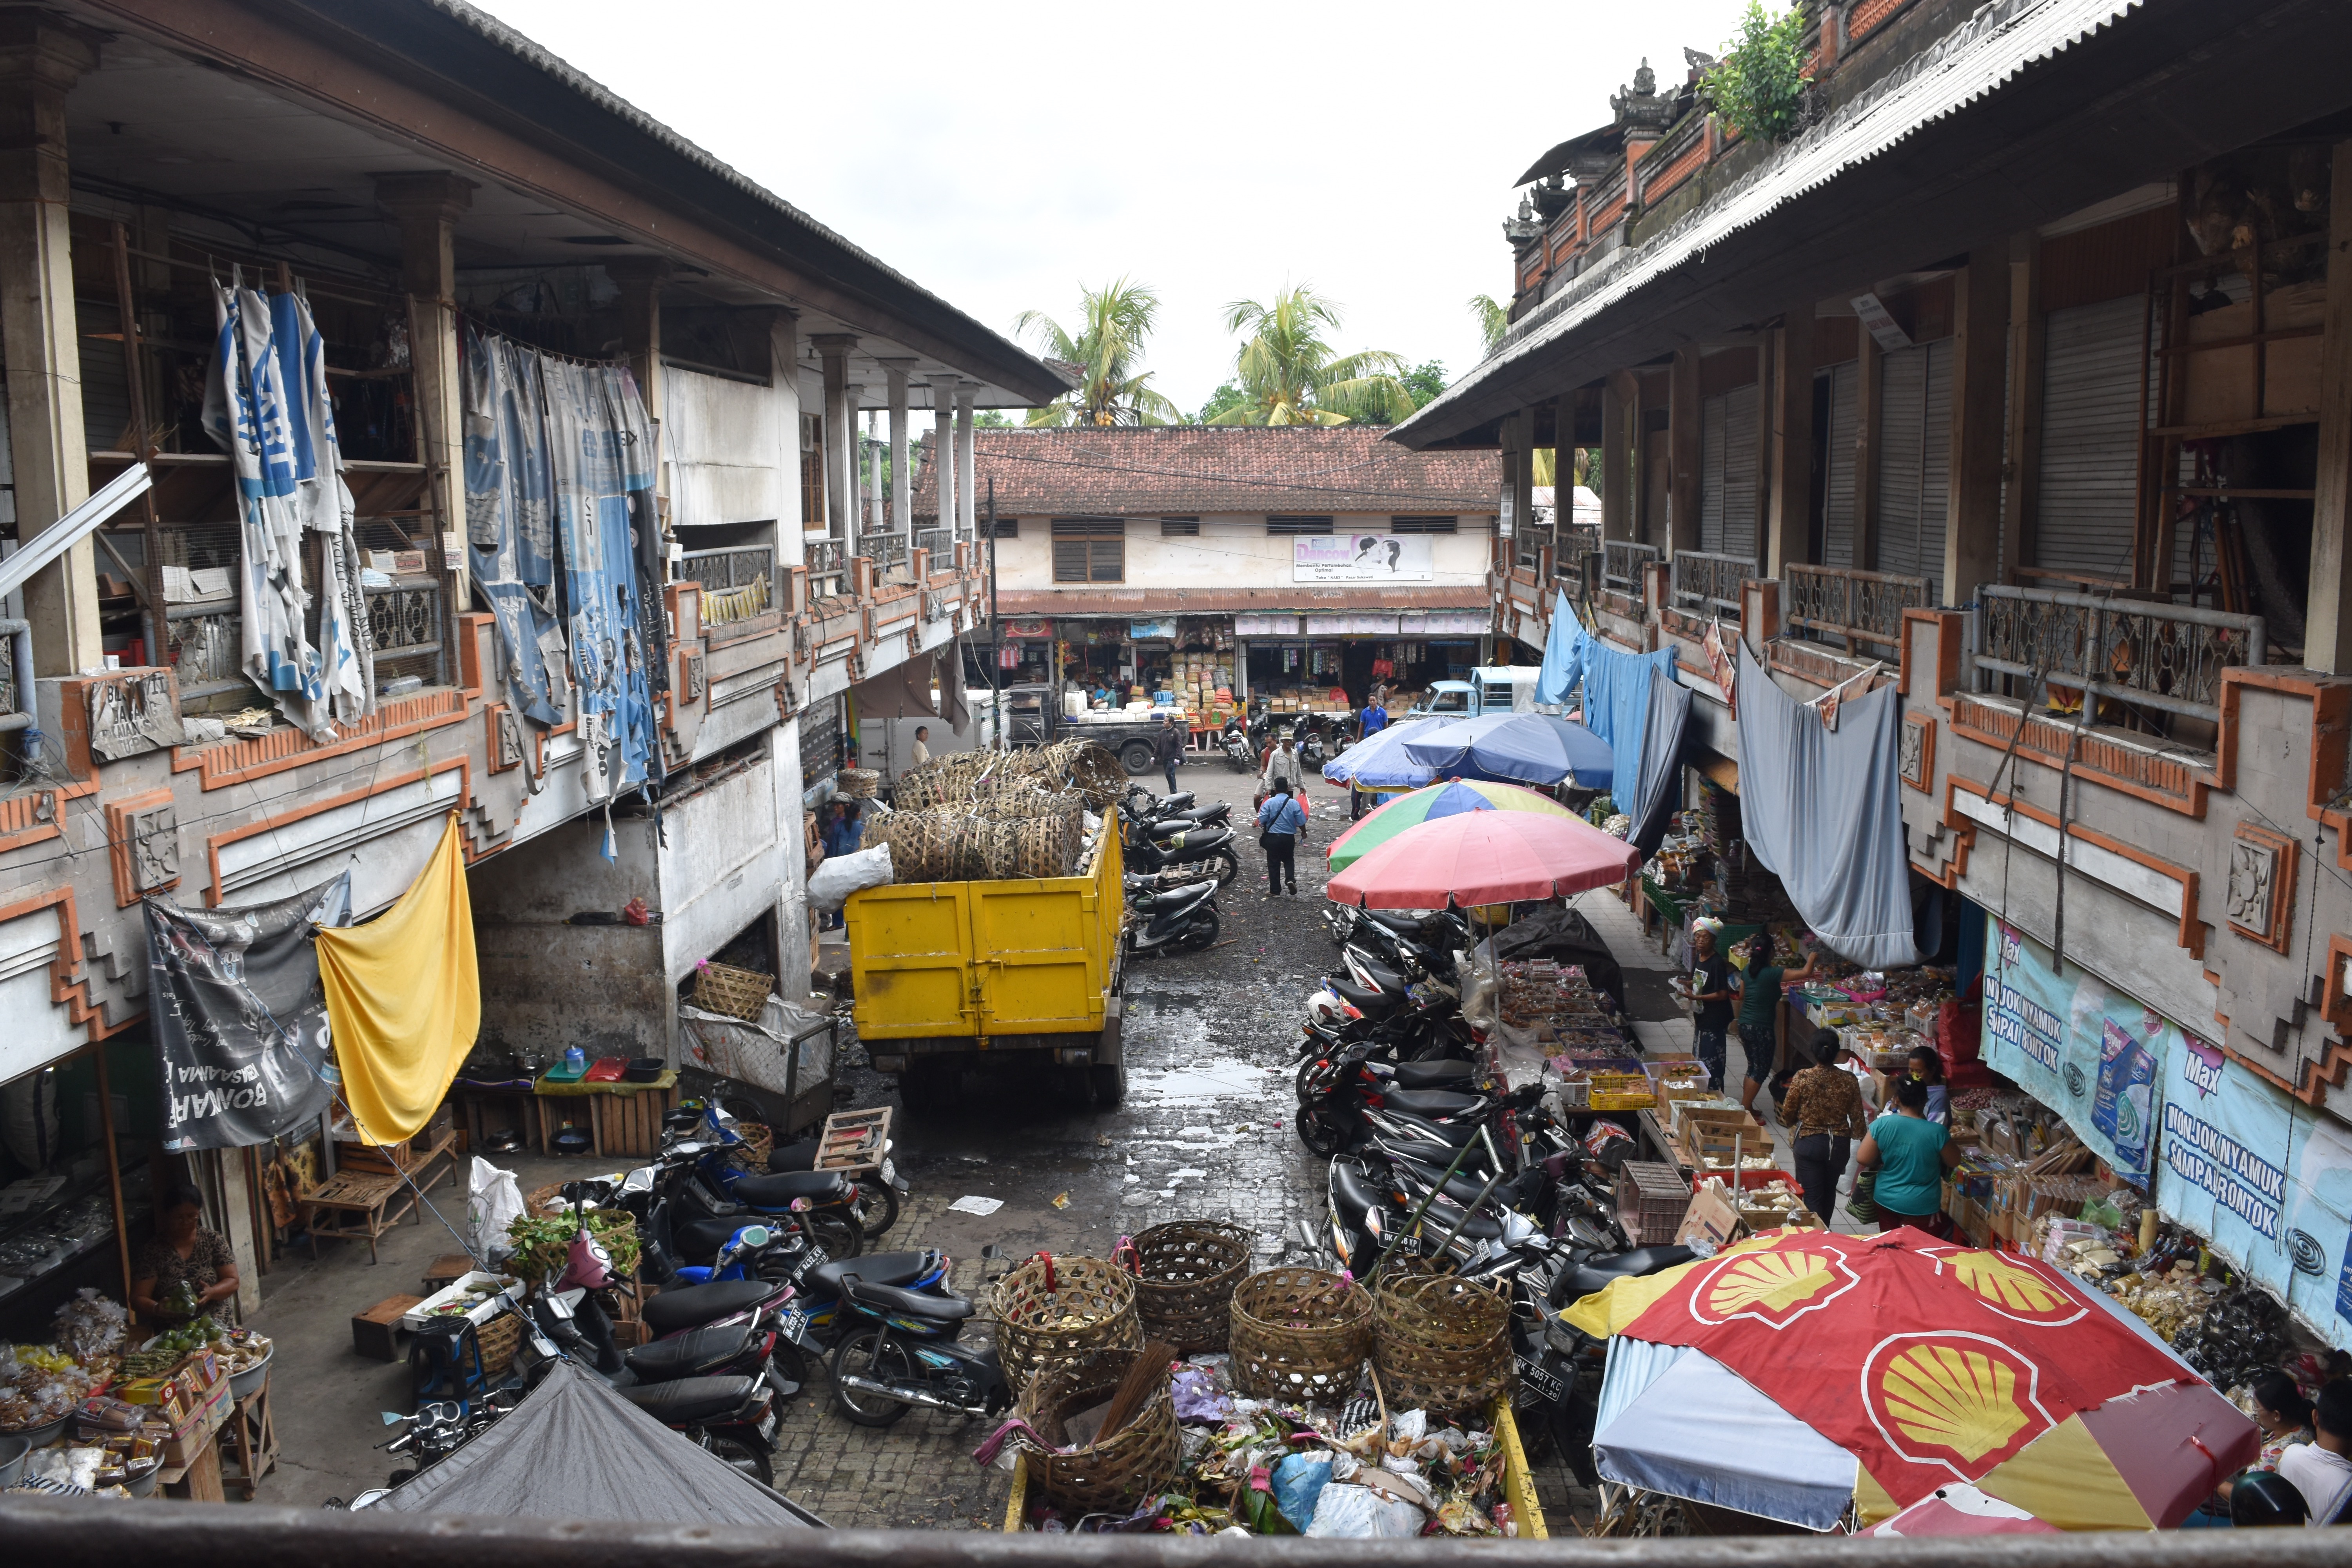 A market in Indonesia, awaiting promised renovations